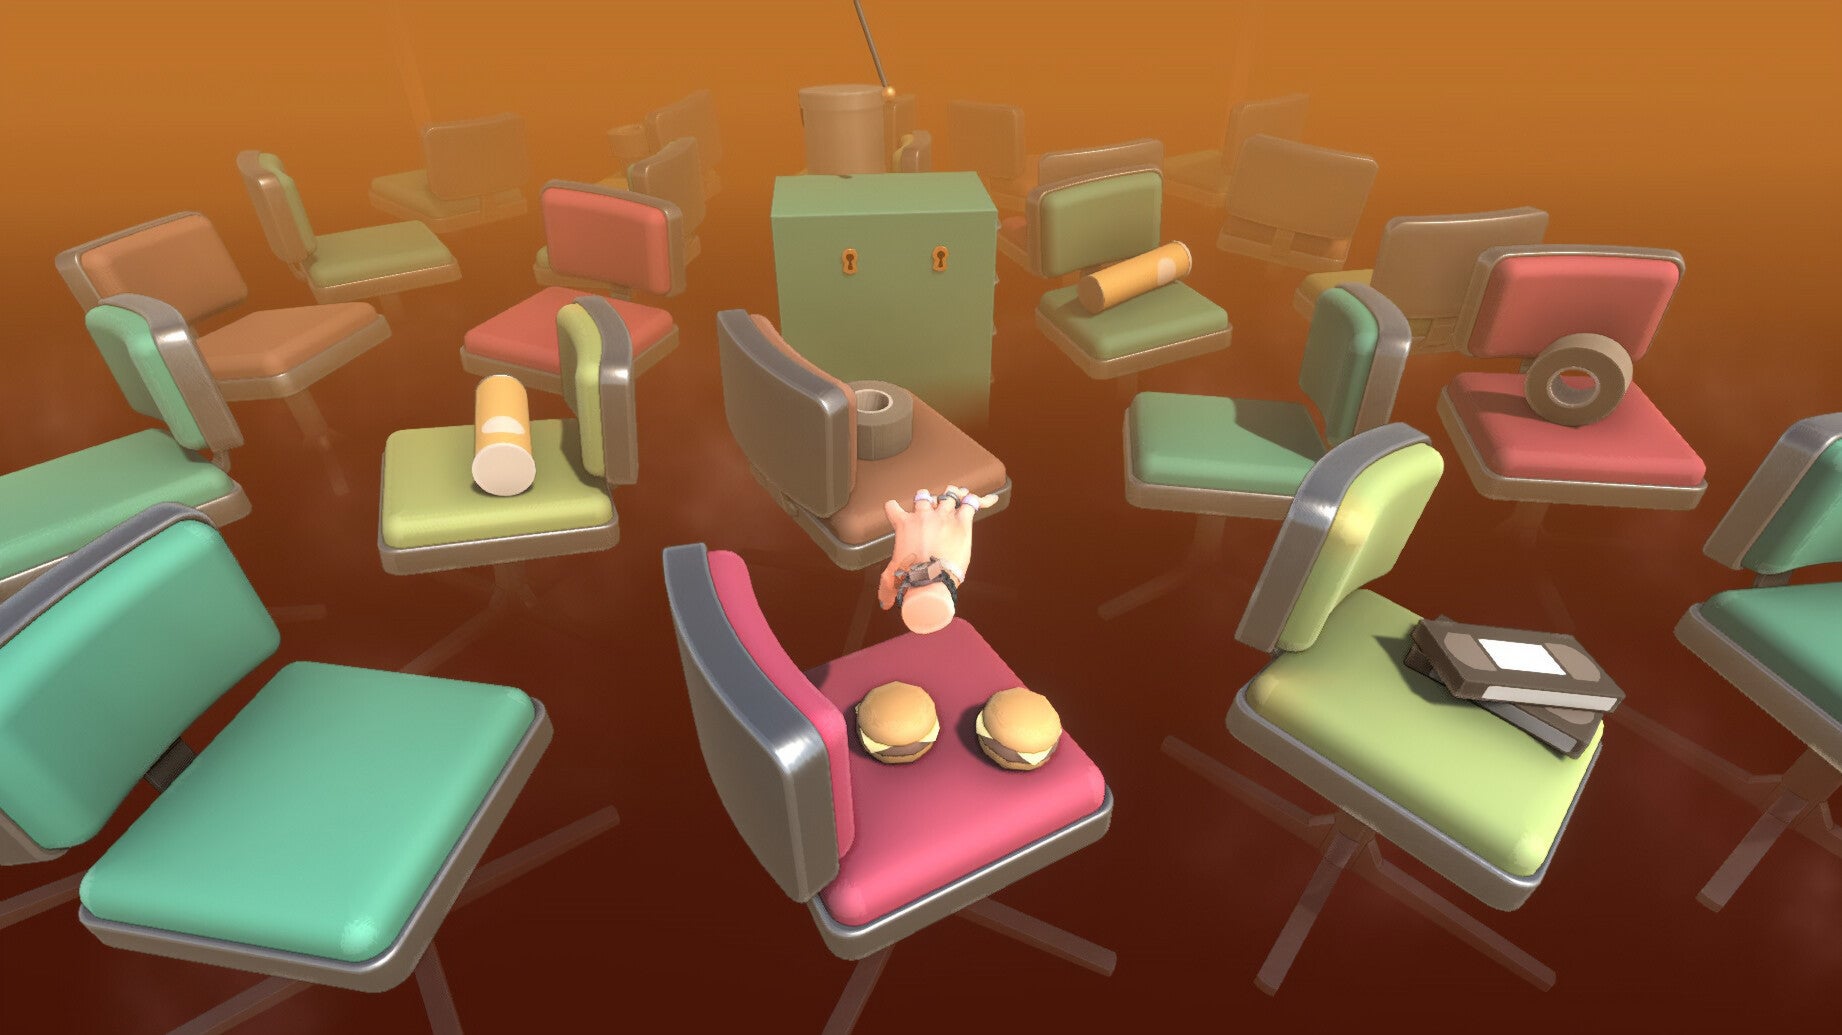 A disembodied hand scuttles over office chairs in Super Adventure Hand